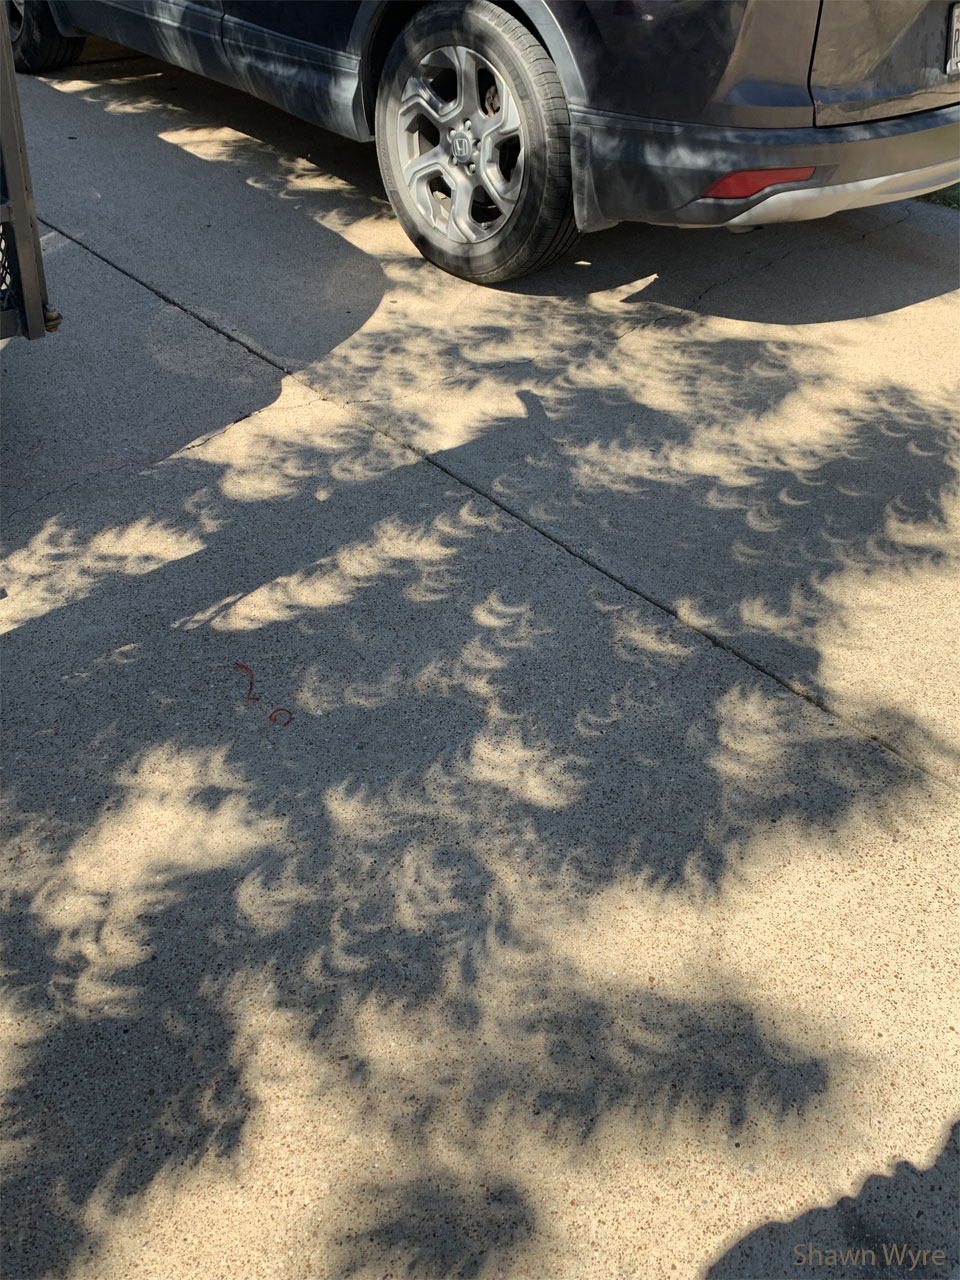 A driveway is shown with a car at the top of the frame
but a series of shadows across the rest of the frame. A 
close inspection of these shadows shows that they are frequently
small images of an ongoing partial solar eclipse.
Please see the explanation for more detailed information.